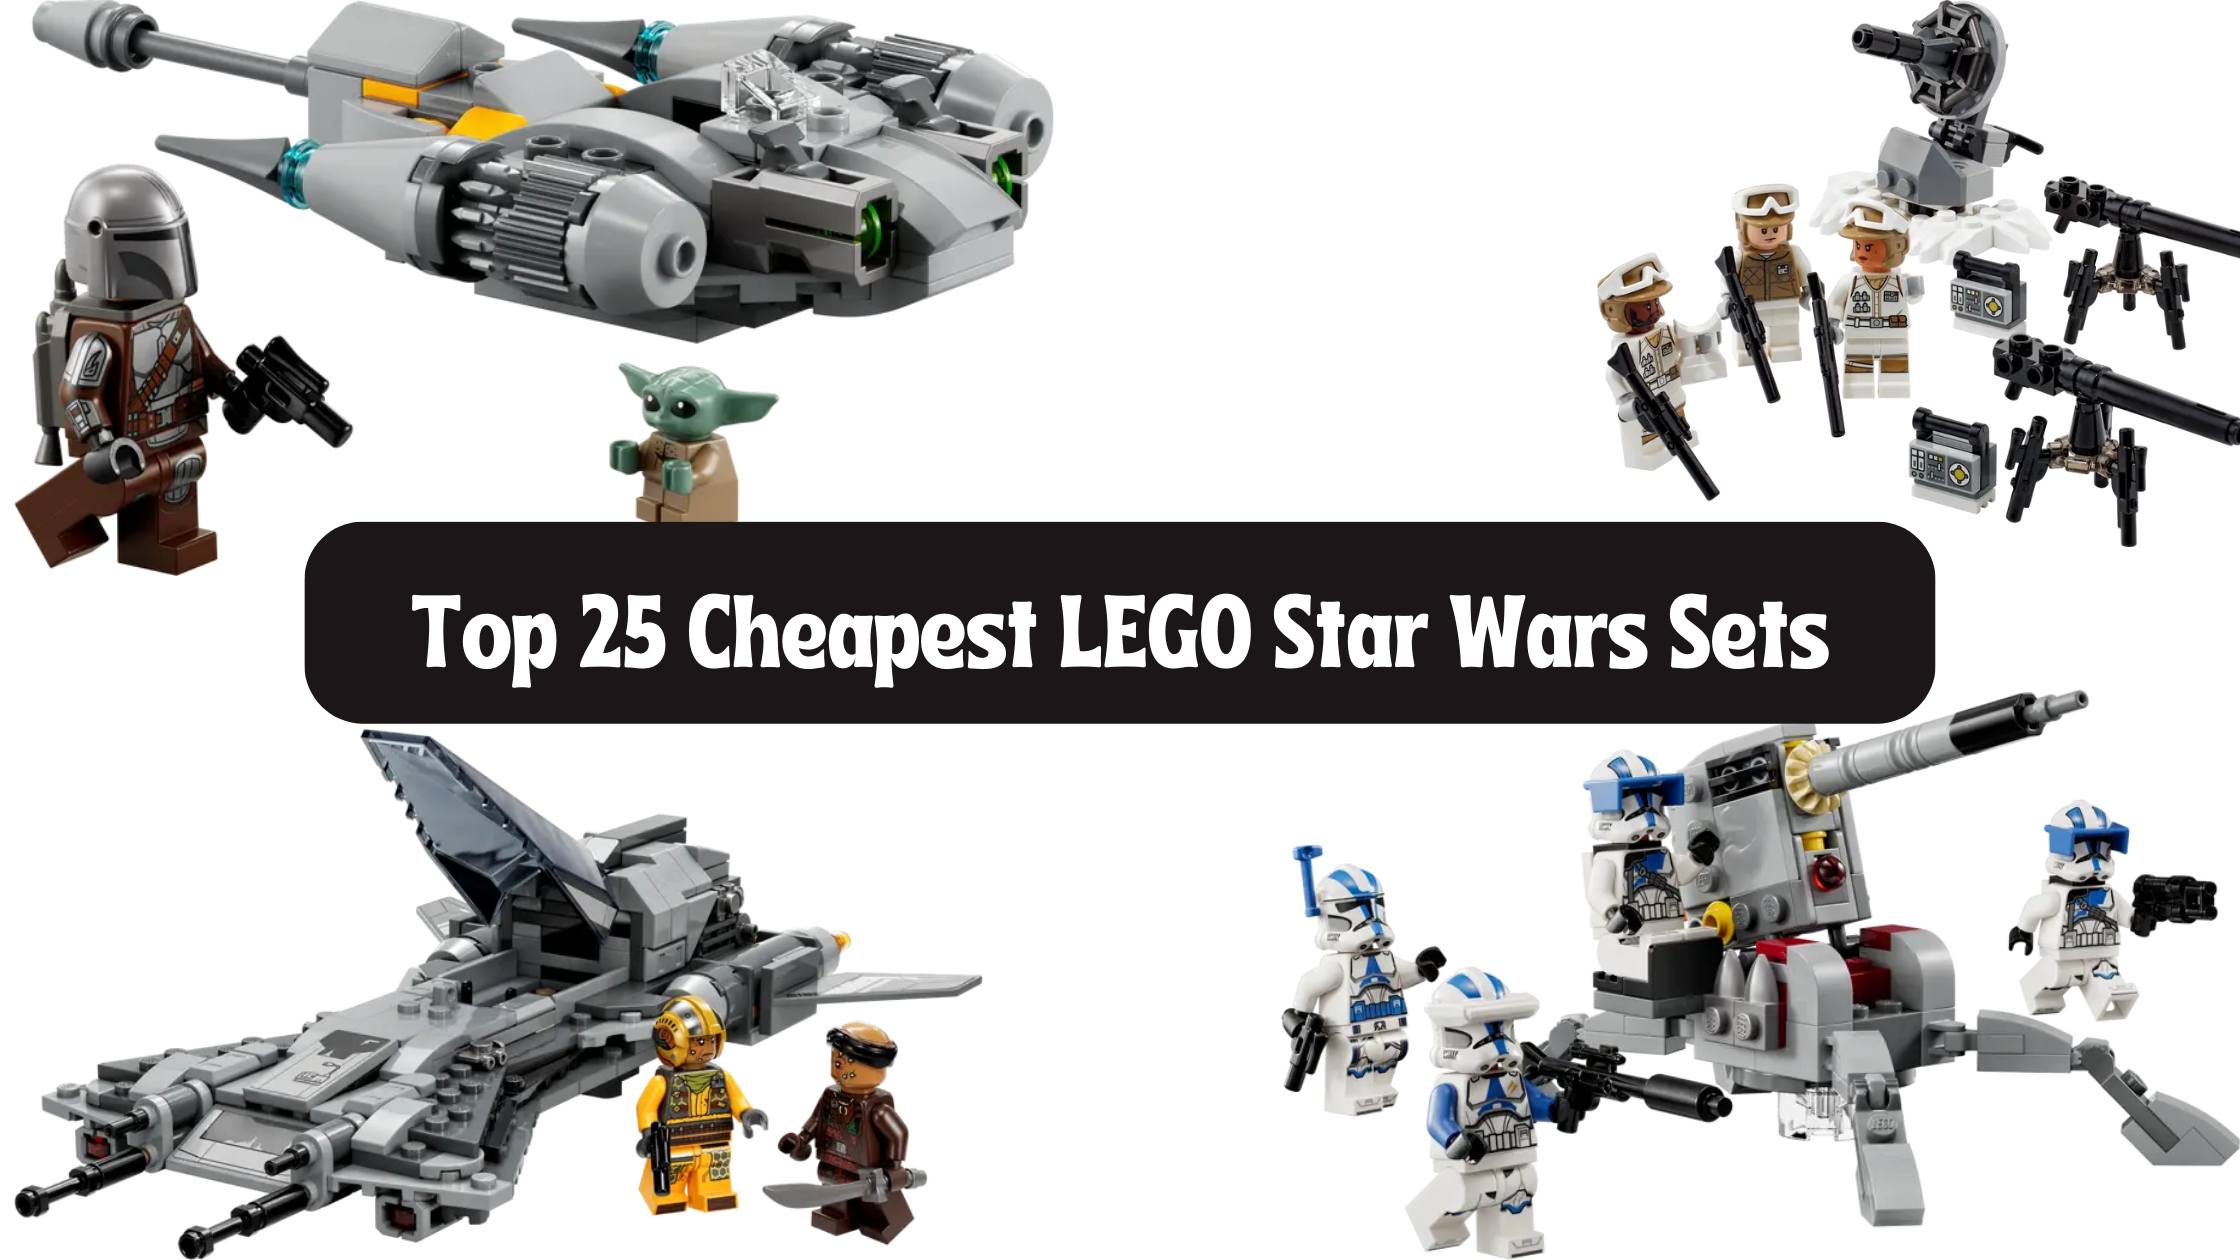 Europa excitation Seks Top 25 Cheapest LEGO Star Wars Sets (Ranked) 2023